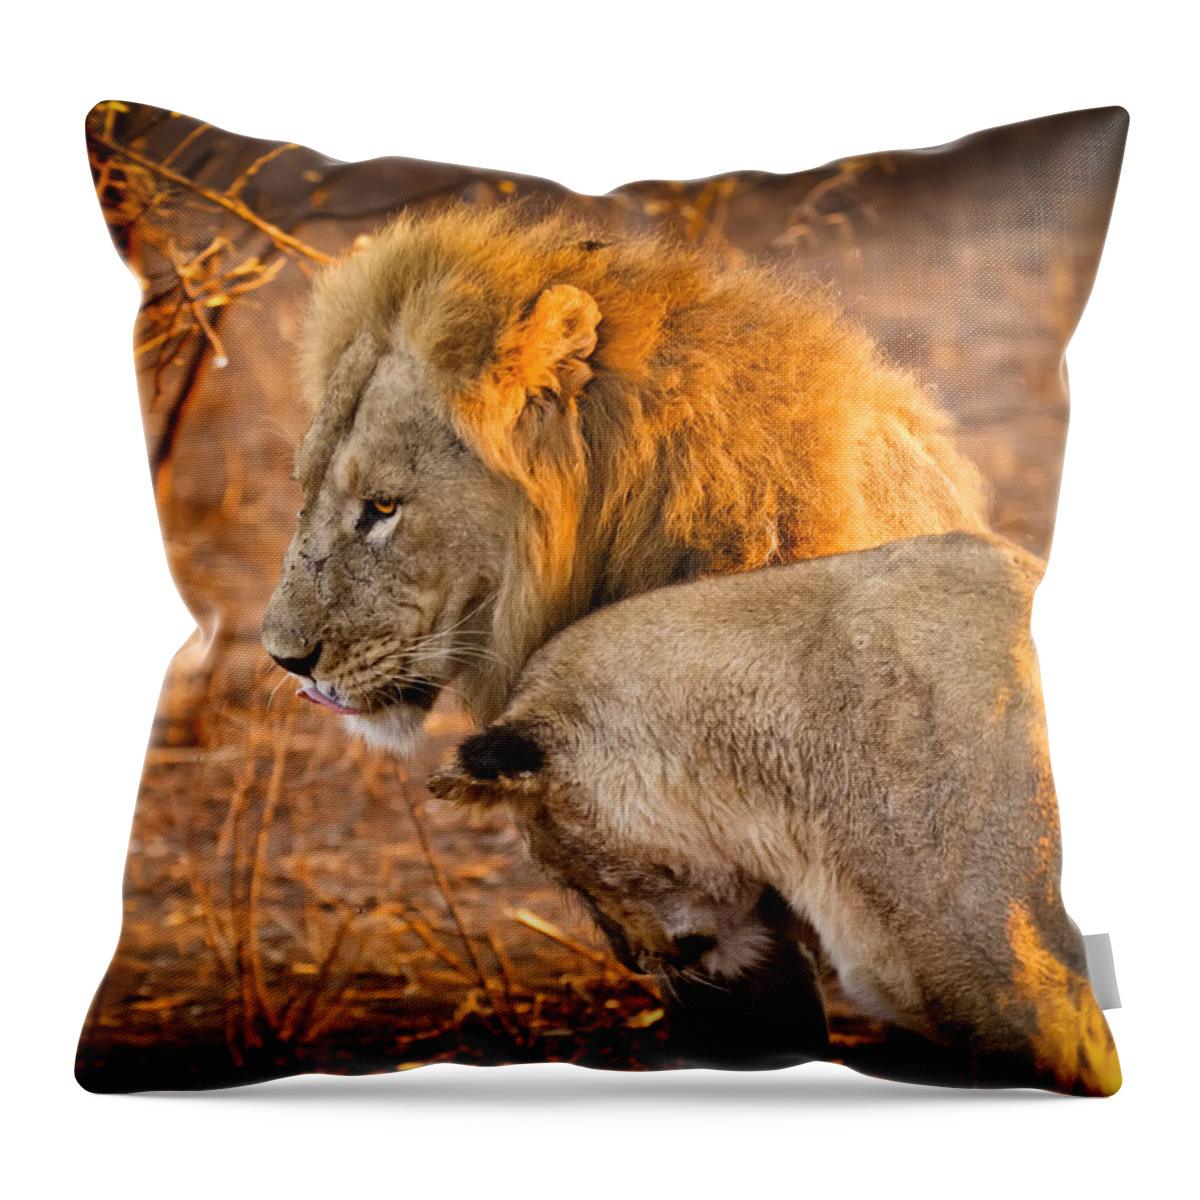 3scape Photos Throw Pillow featuring the photograph King and Queen by Adam Romanowicz